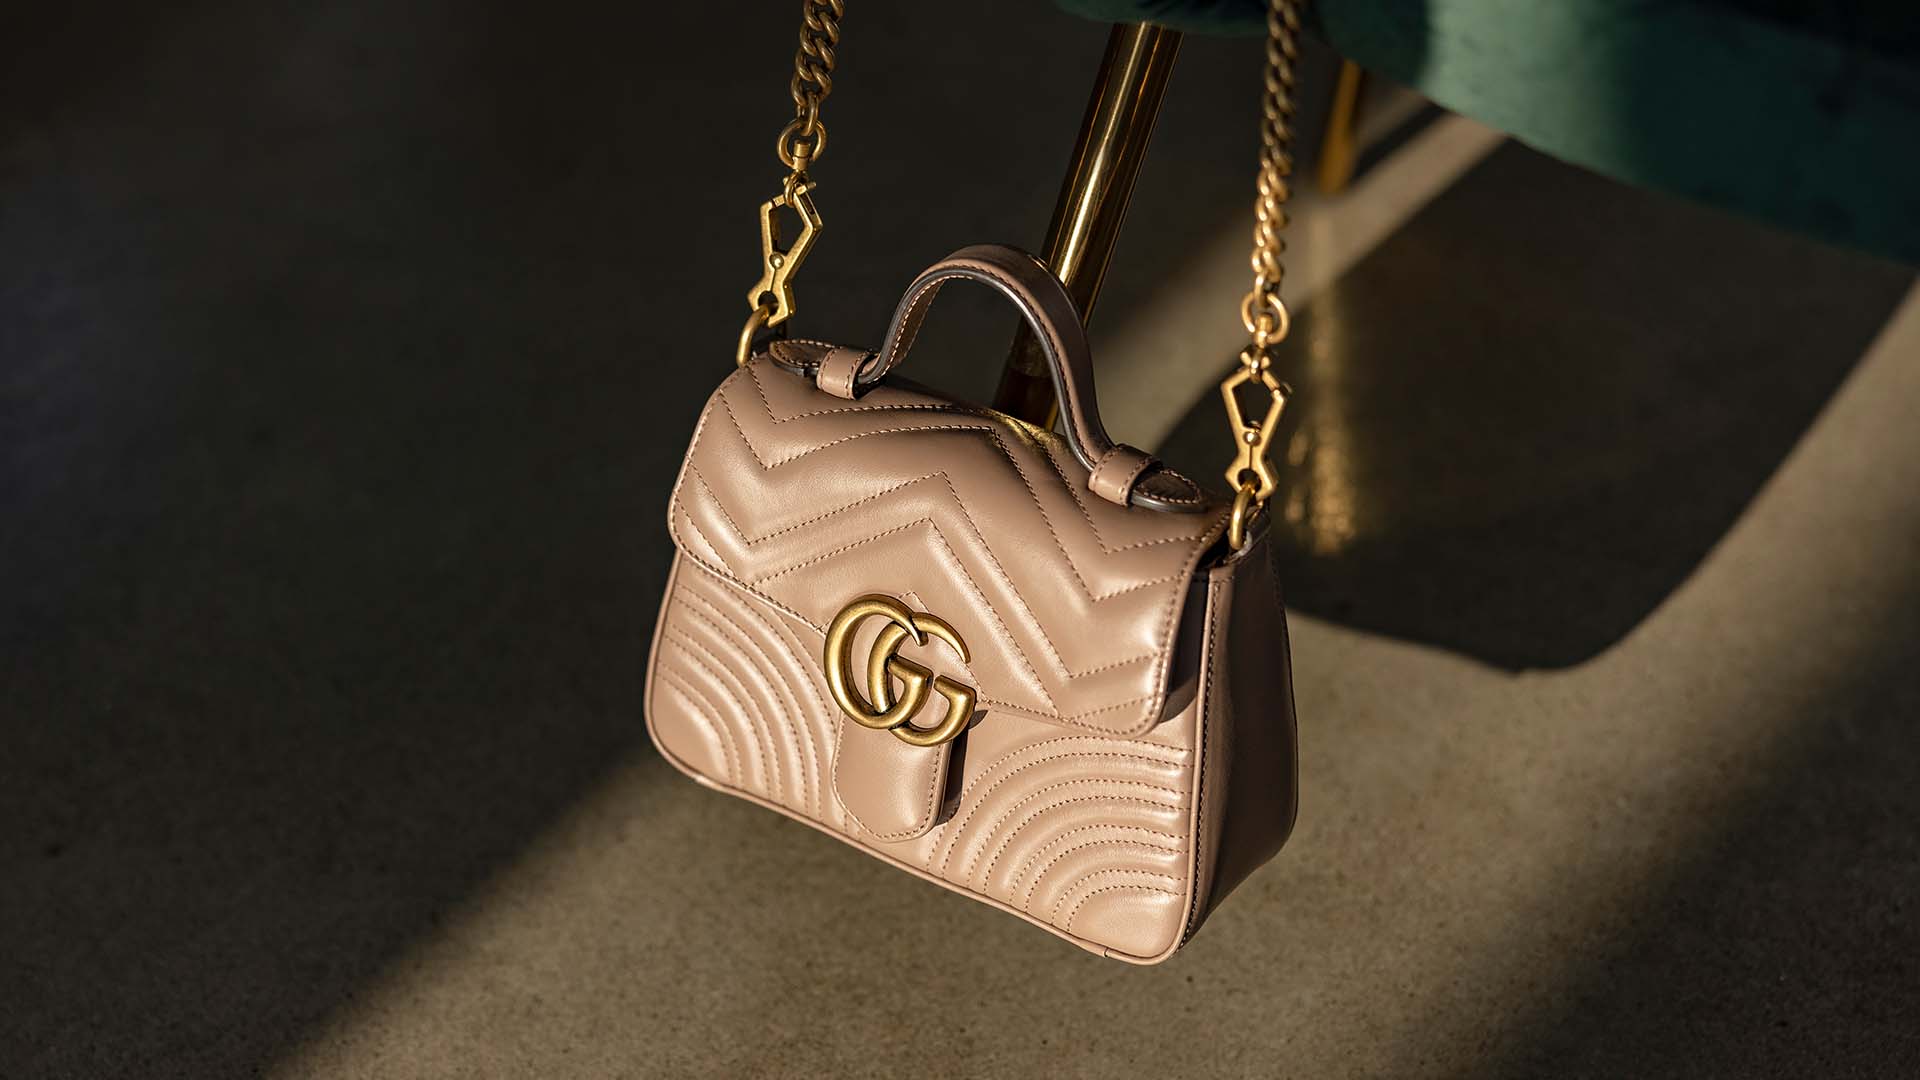 gucci and chanel bags from